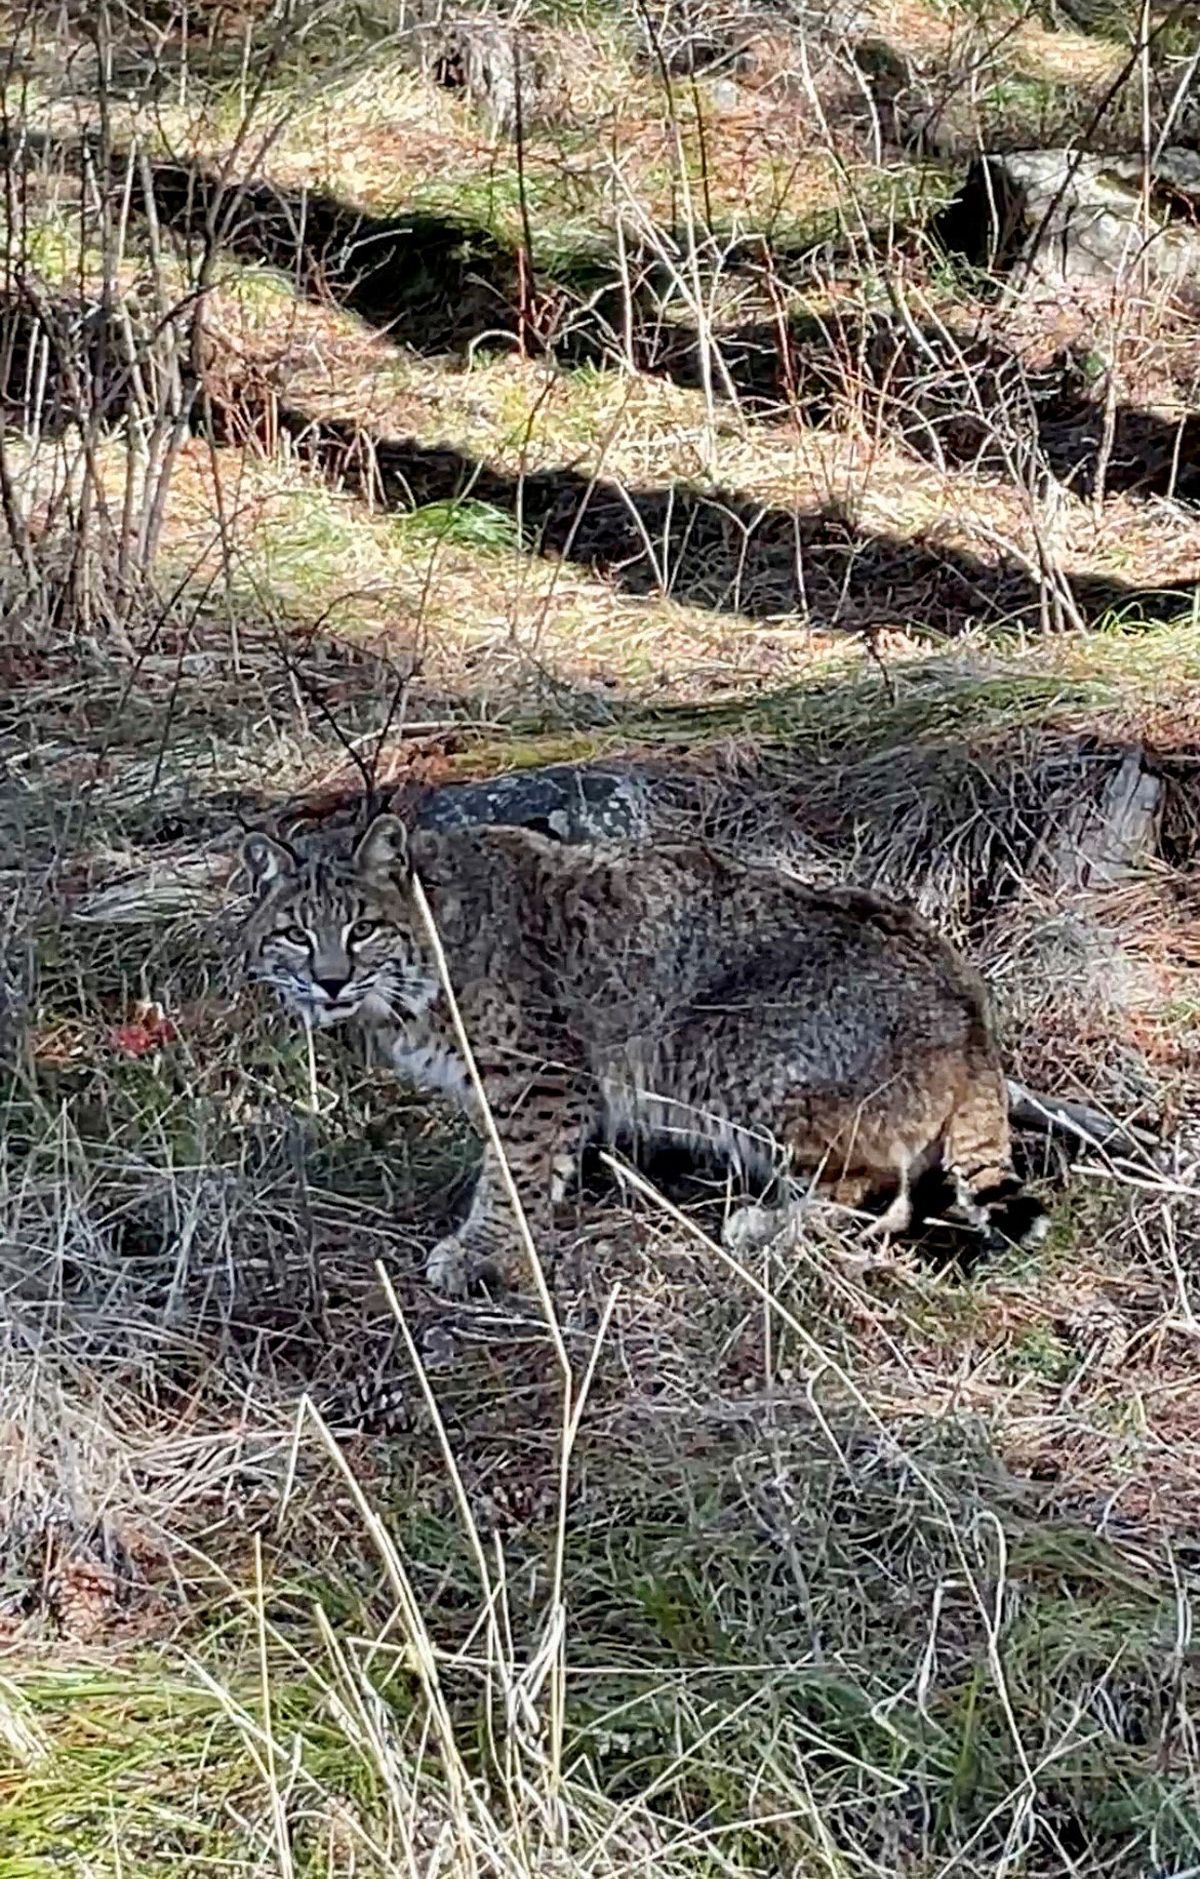 A male bobcat north of Yakima that was GPS-collared last winter as part of a WDFW study. Between their camouflaged appearance, ghostlike traits and wariness of humans, bobcats are rarely seen.  (Courtesy of Lindsay Welfelt, a WDFW wildlife biologist)